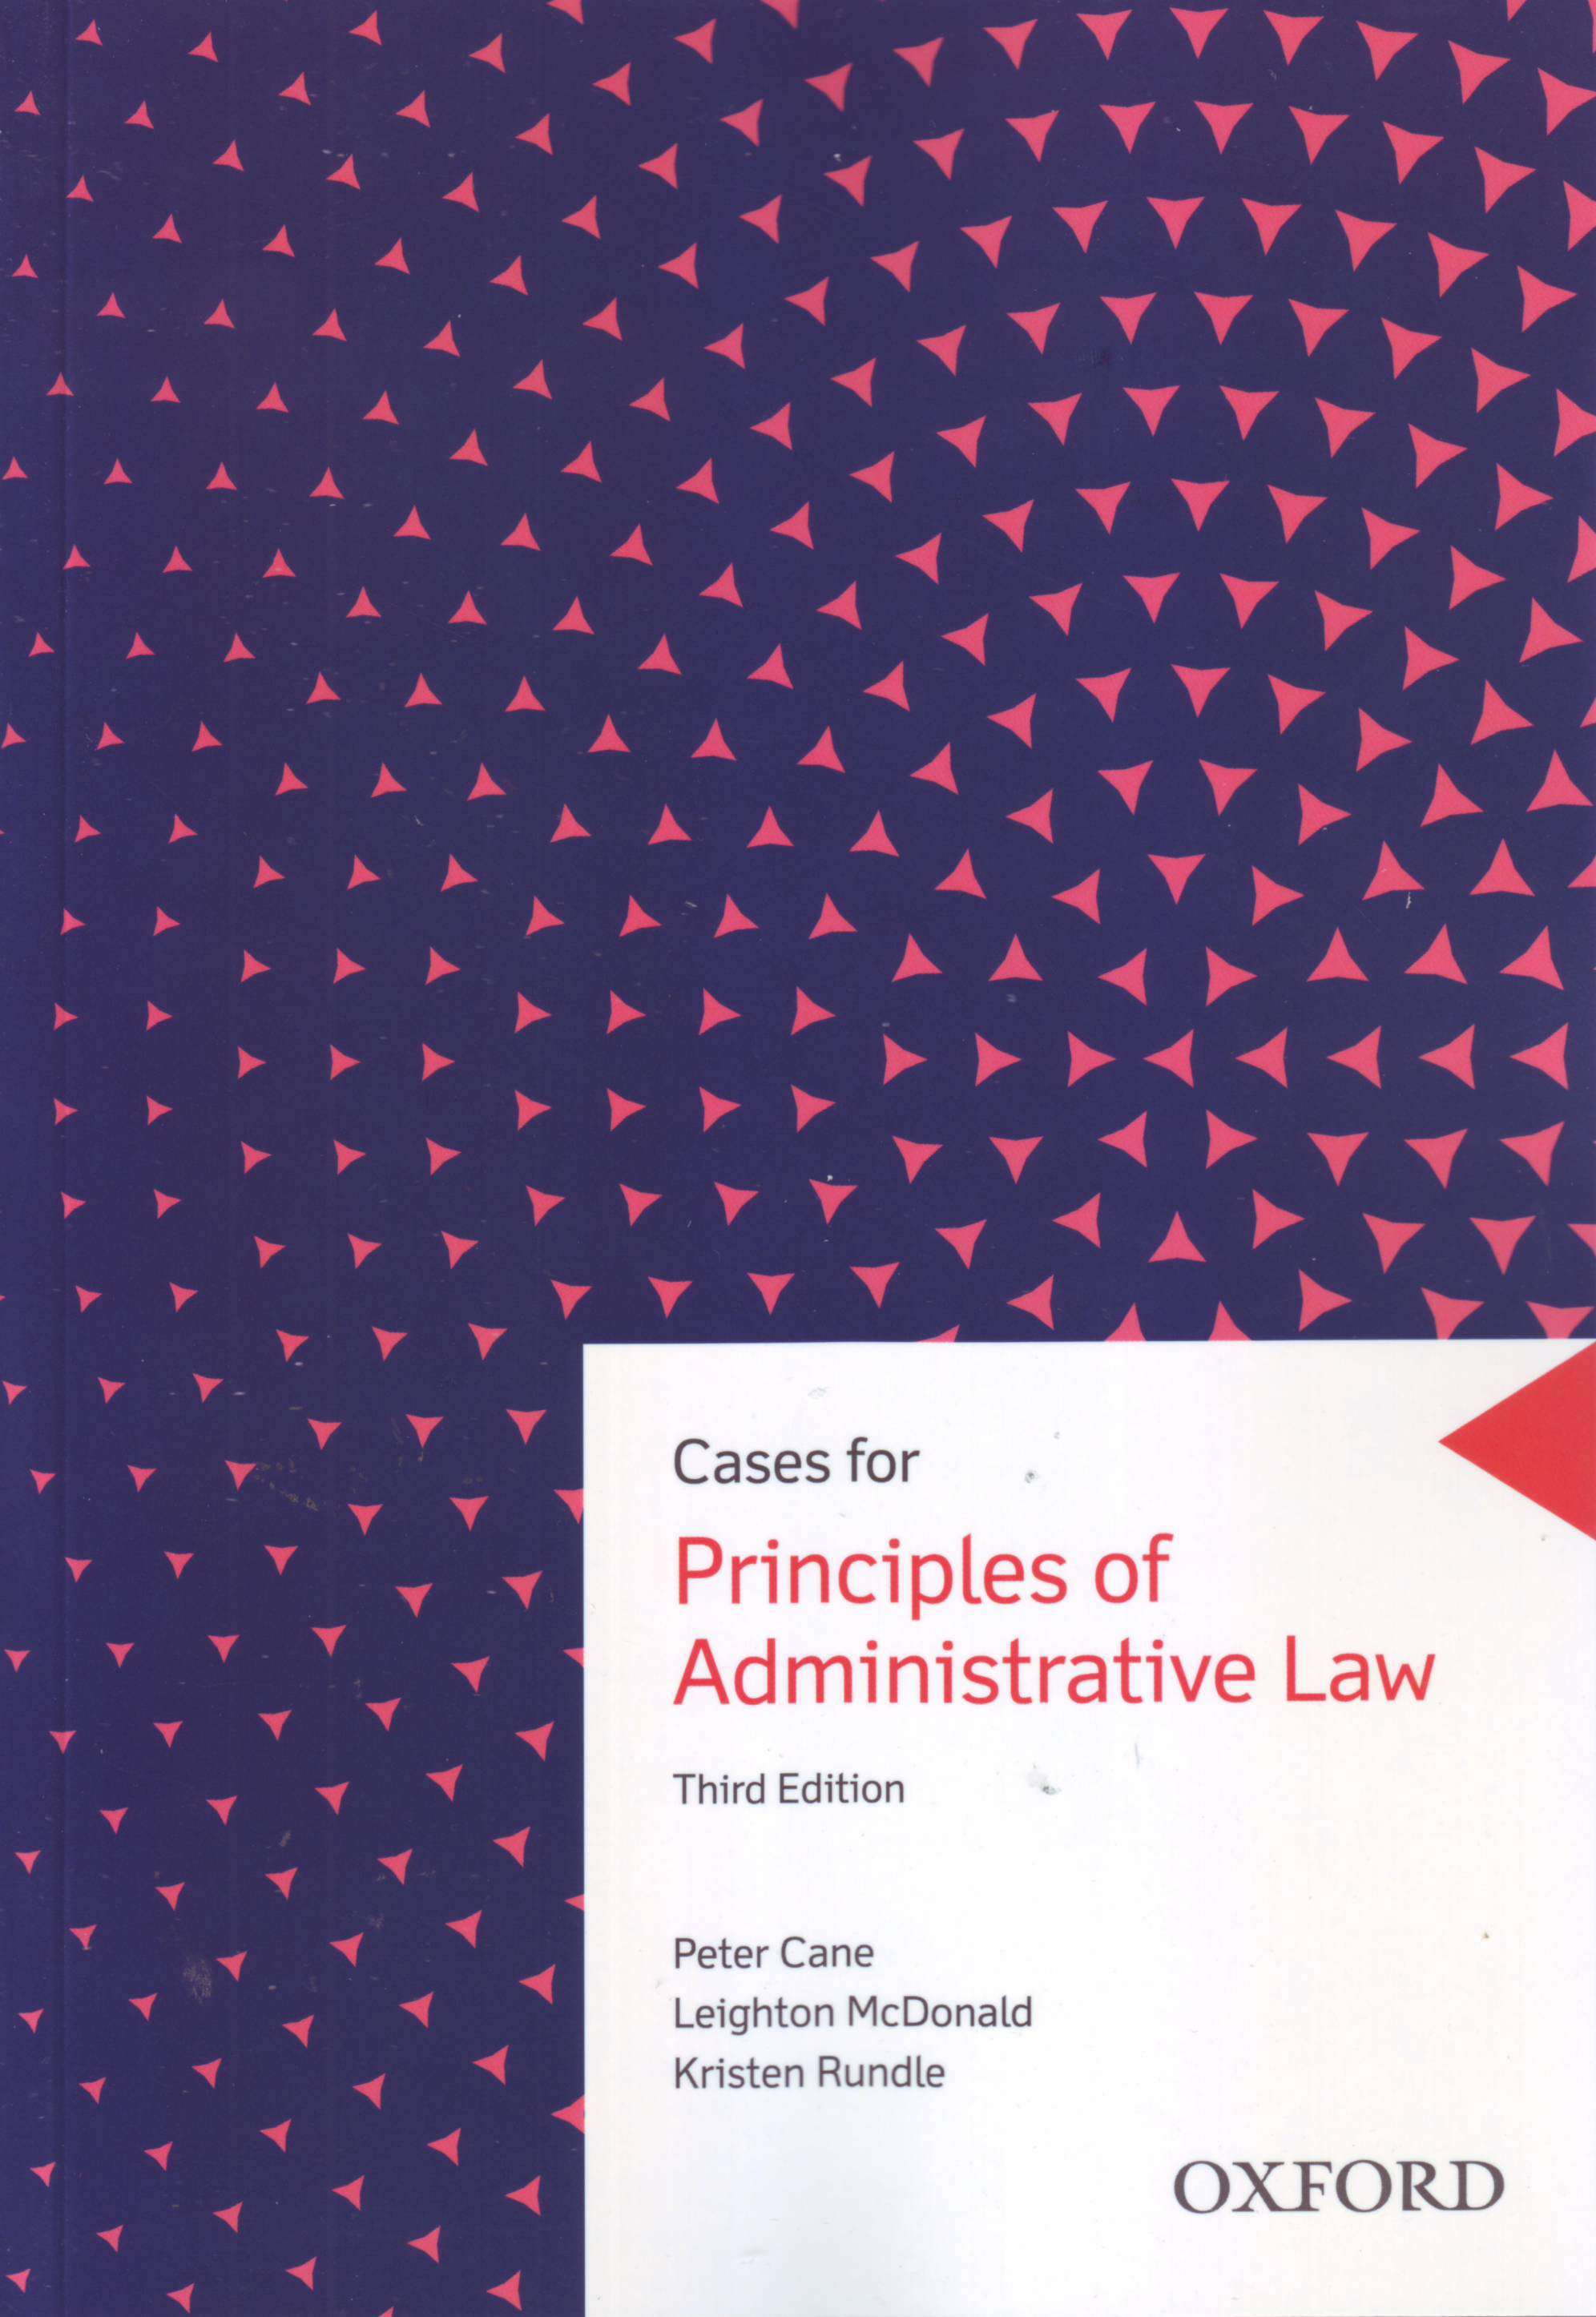 Cases for Principles of Administrative Law e3